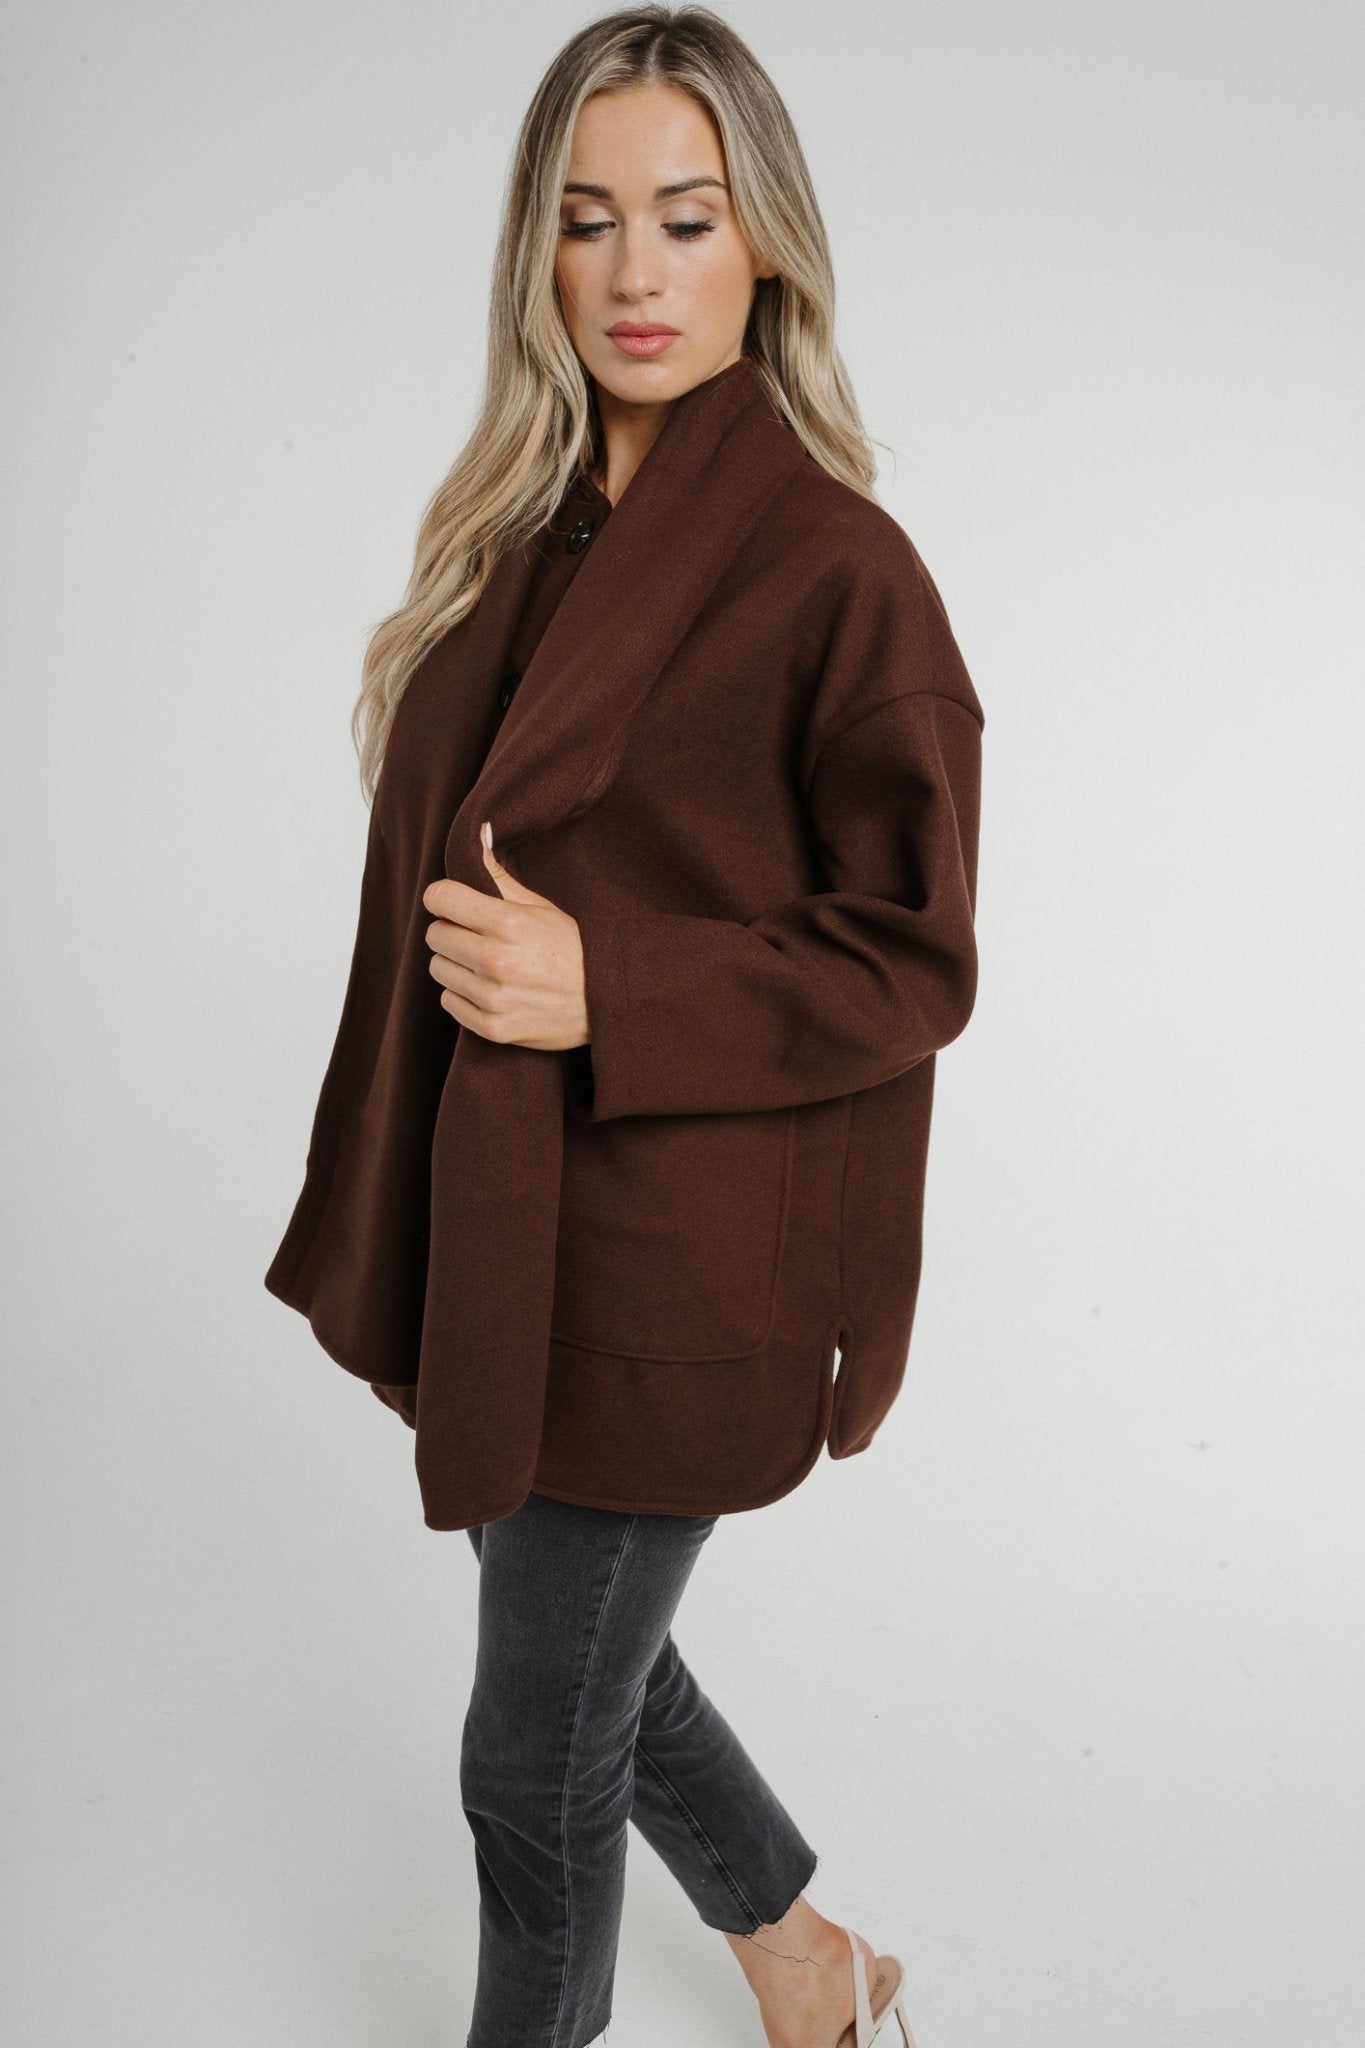 Aria Jacket With Scarf In Chocolate - The Walk in Wardrobe